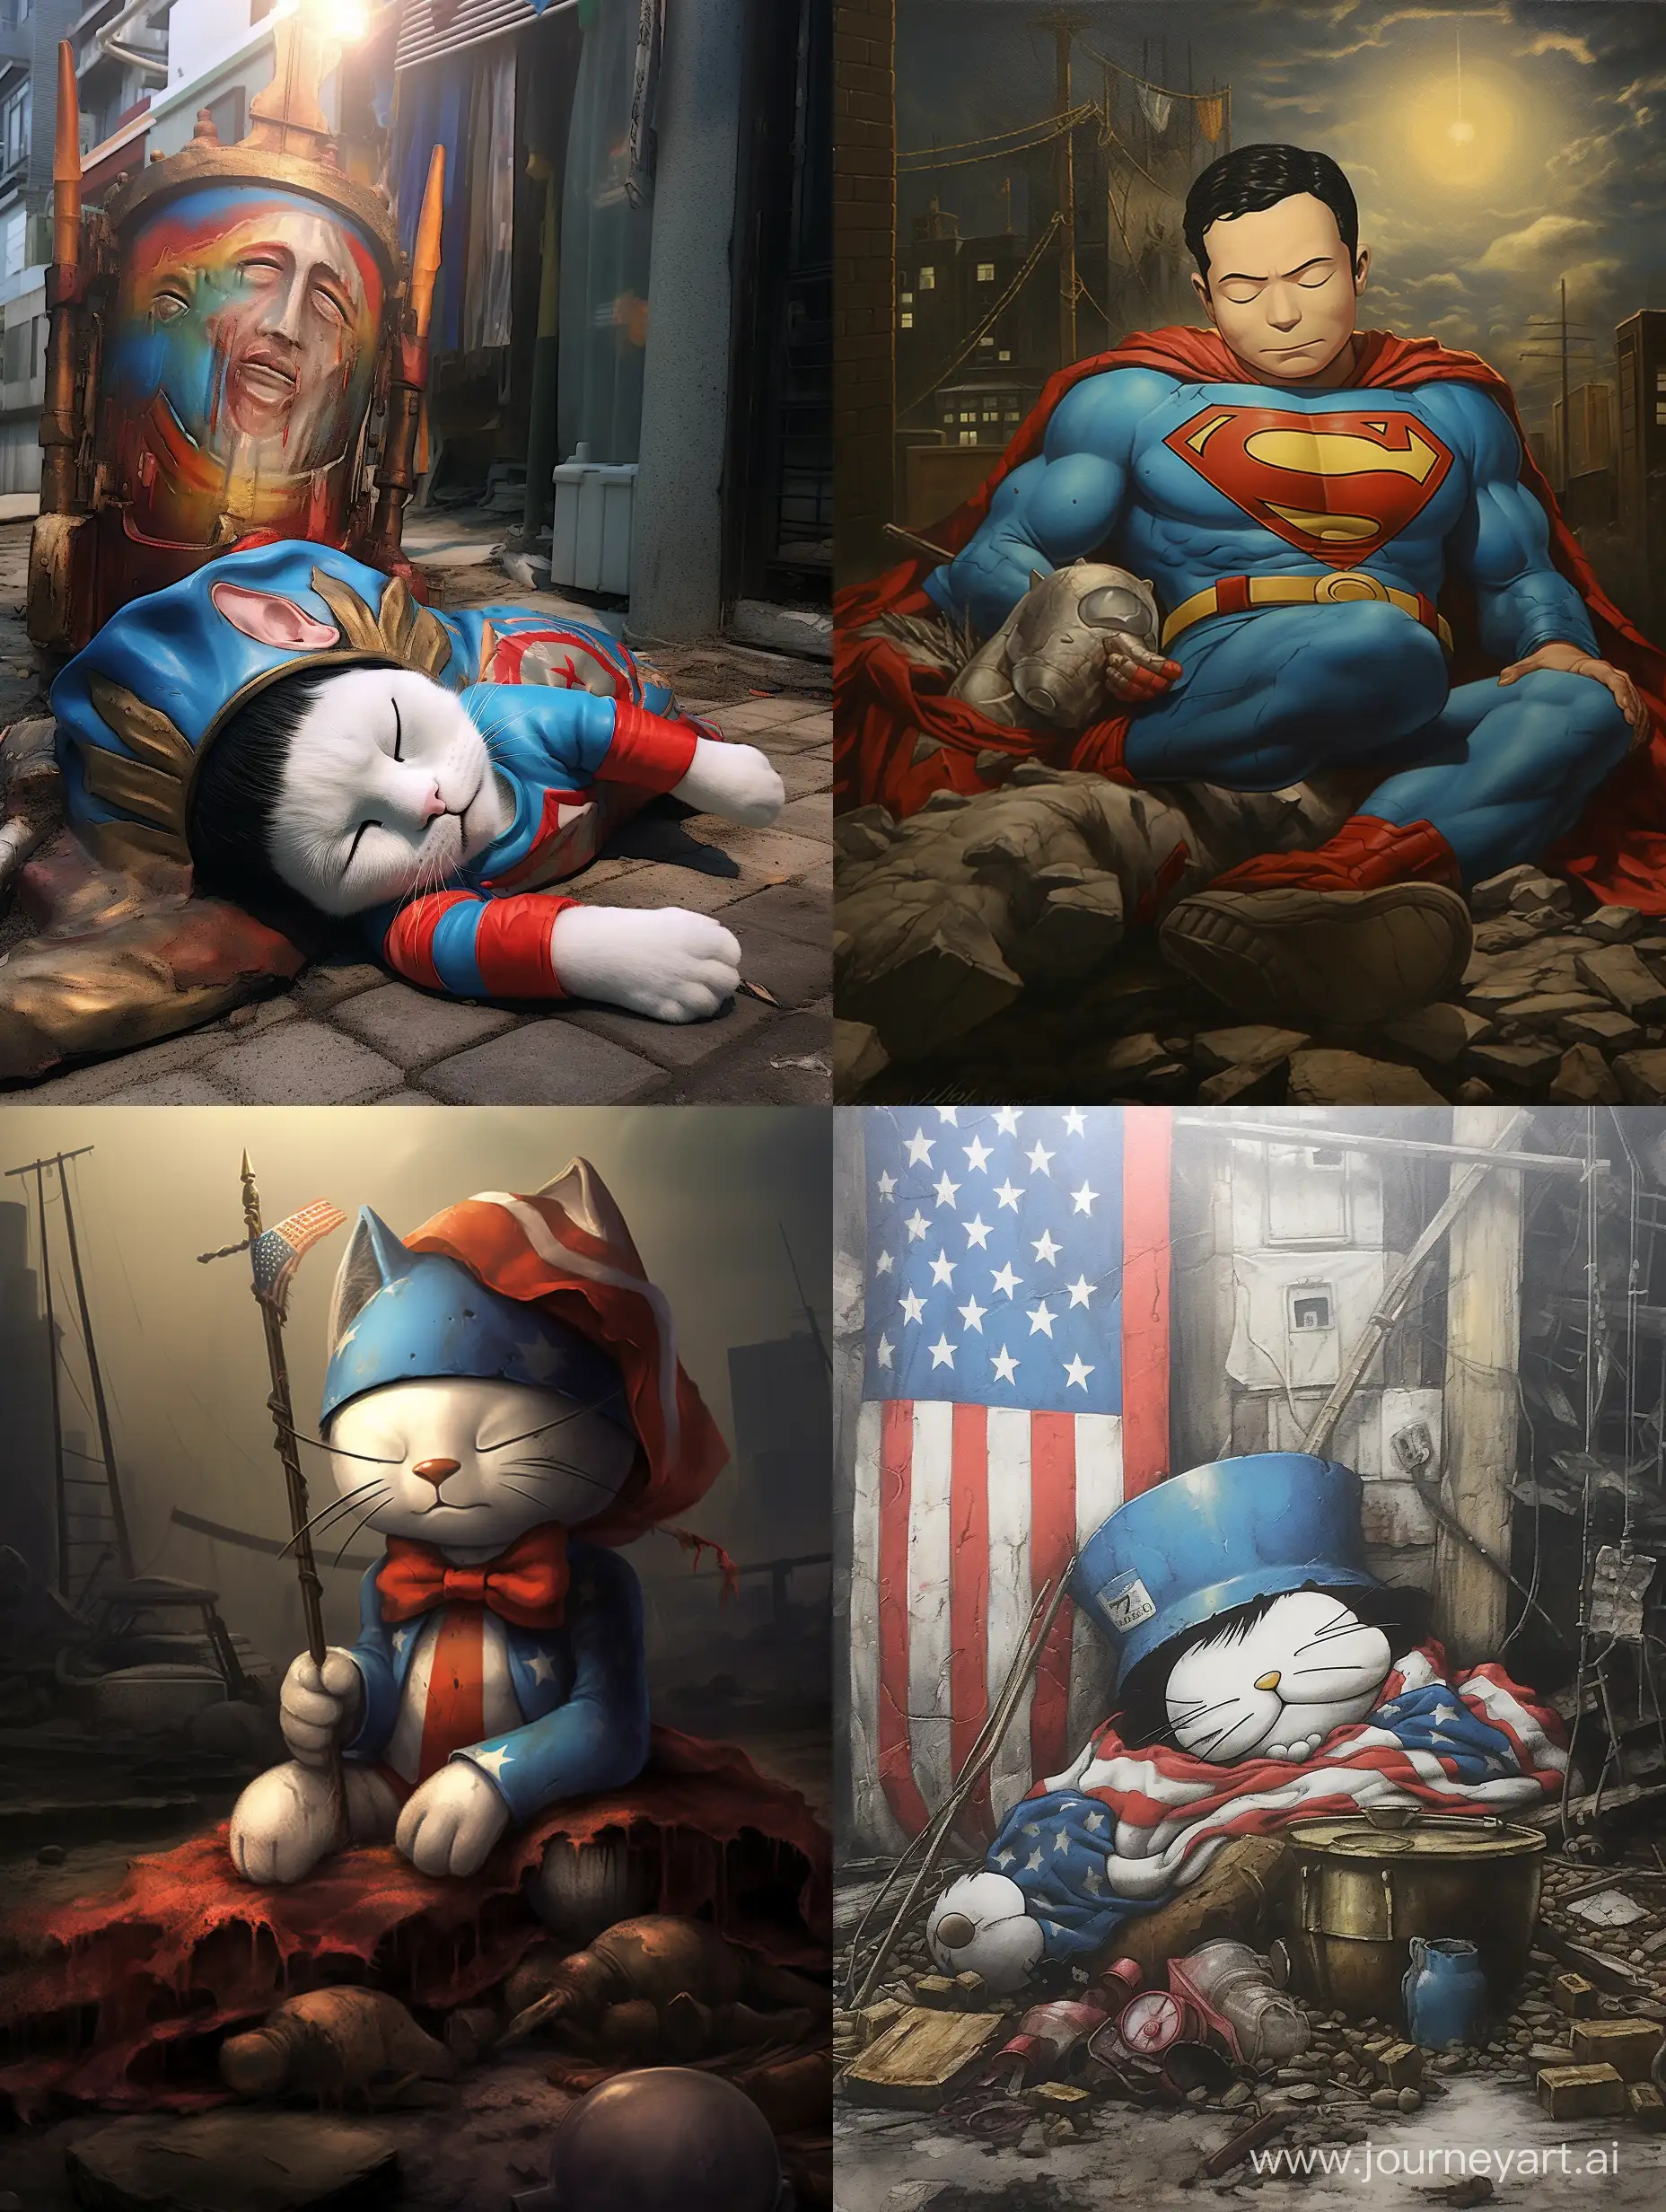 Doraemon sleeps on the street with the Statue of Liberty
